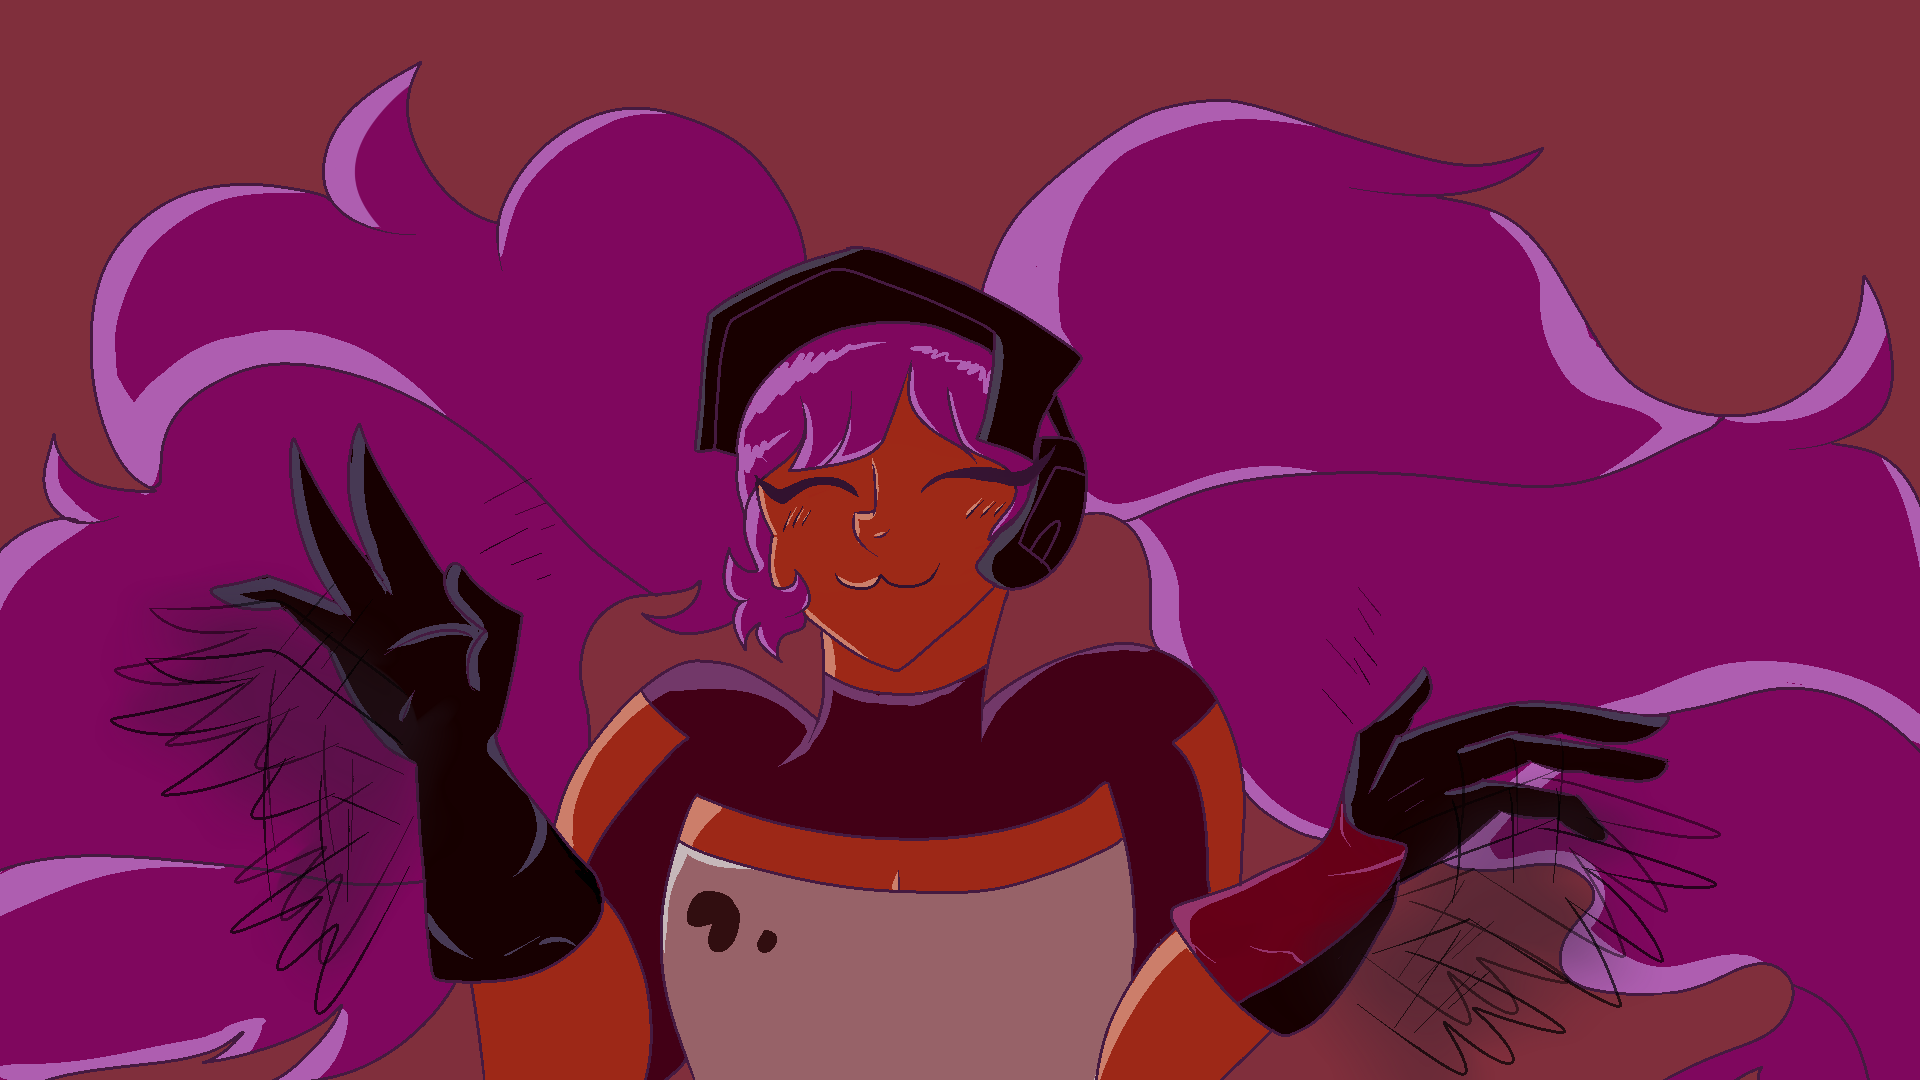 Searching for 'Entrapta'